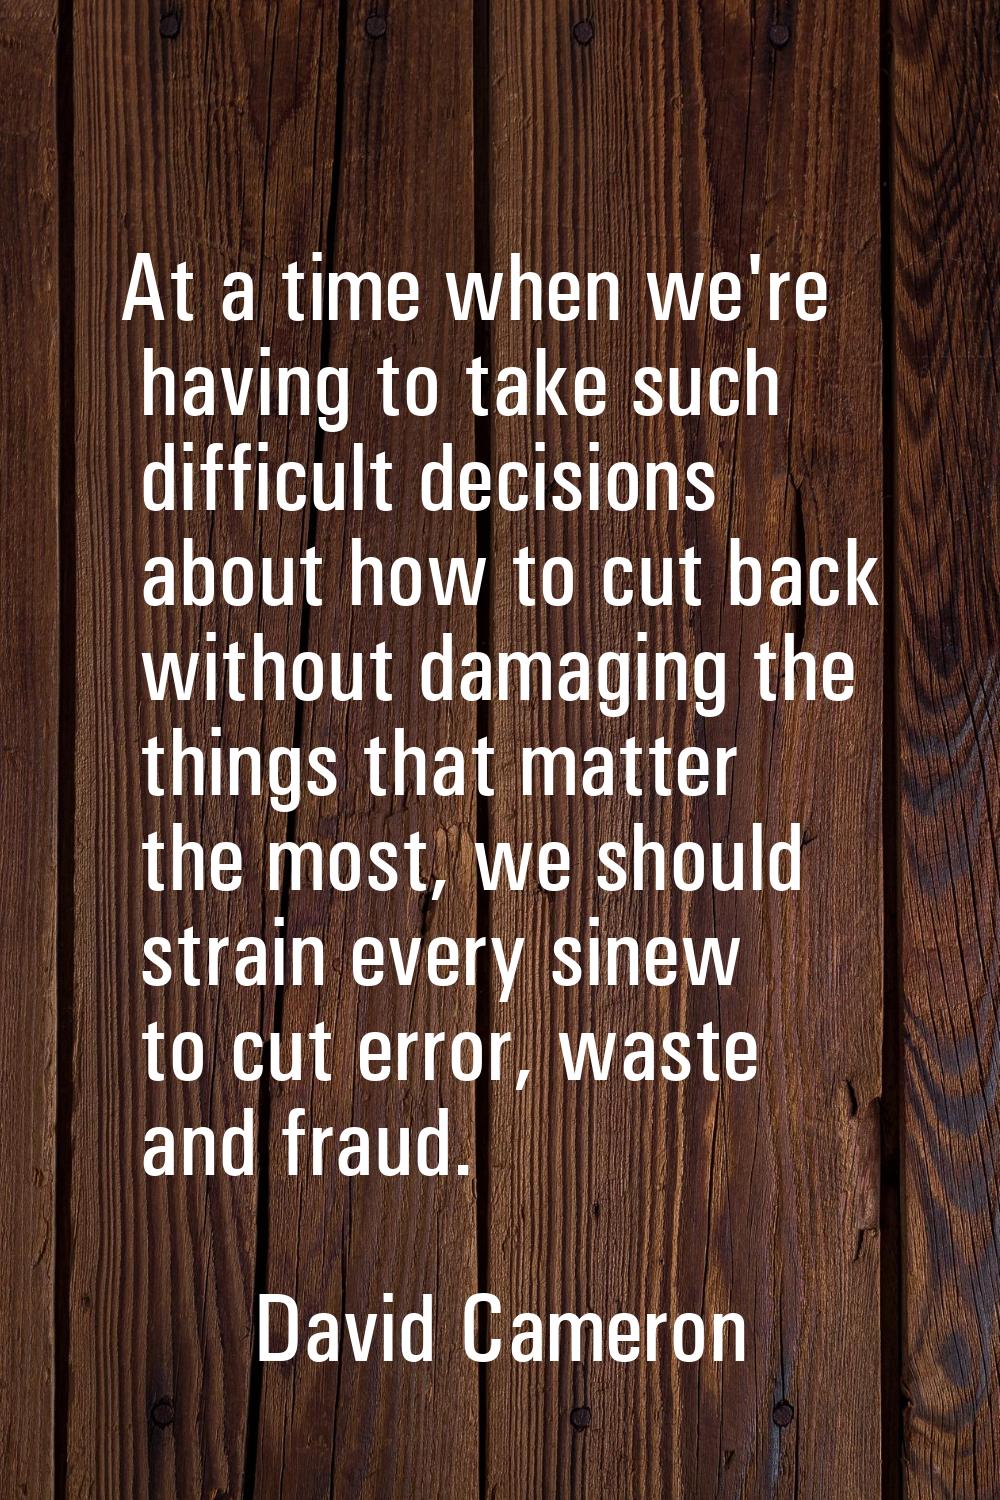 At a time when we're having to take such difficult decisions about how to cut back without damaging